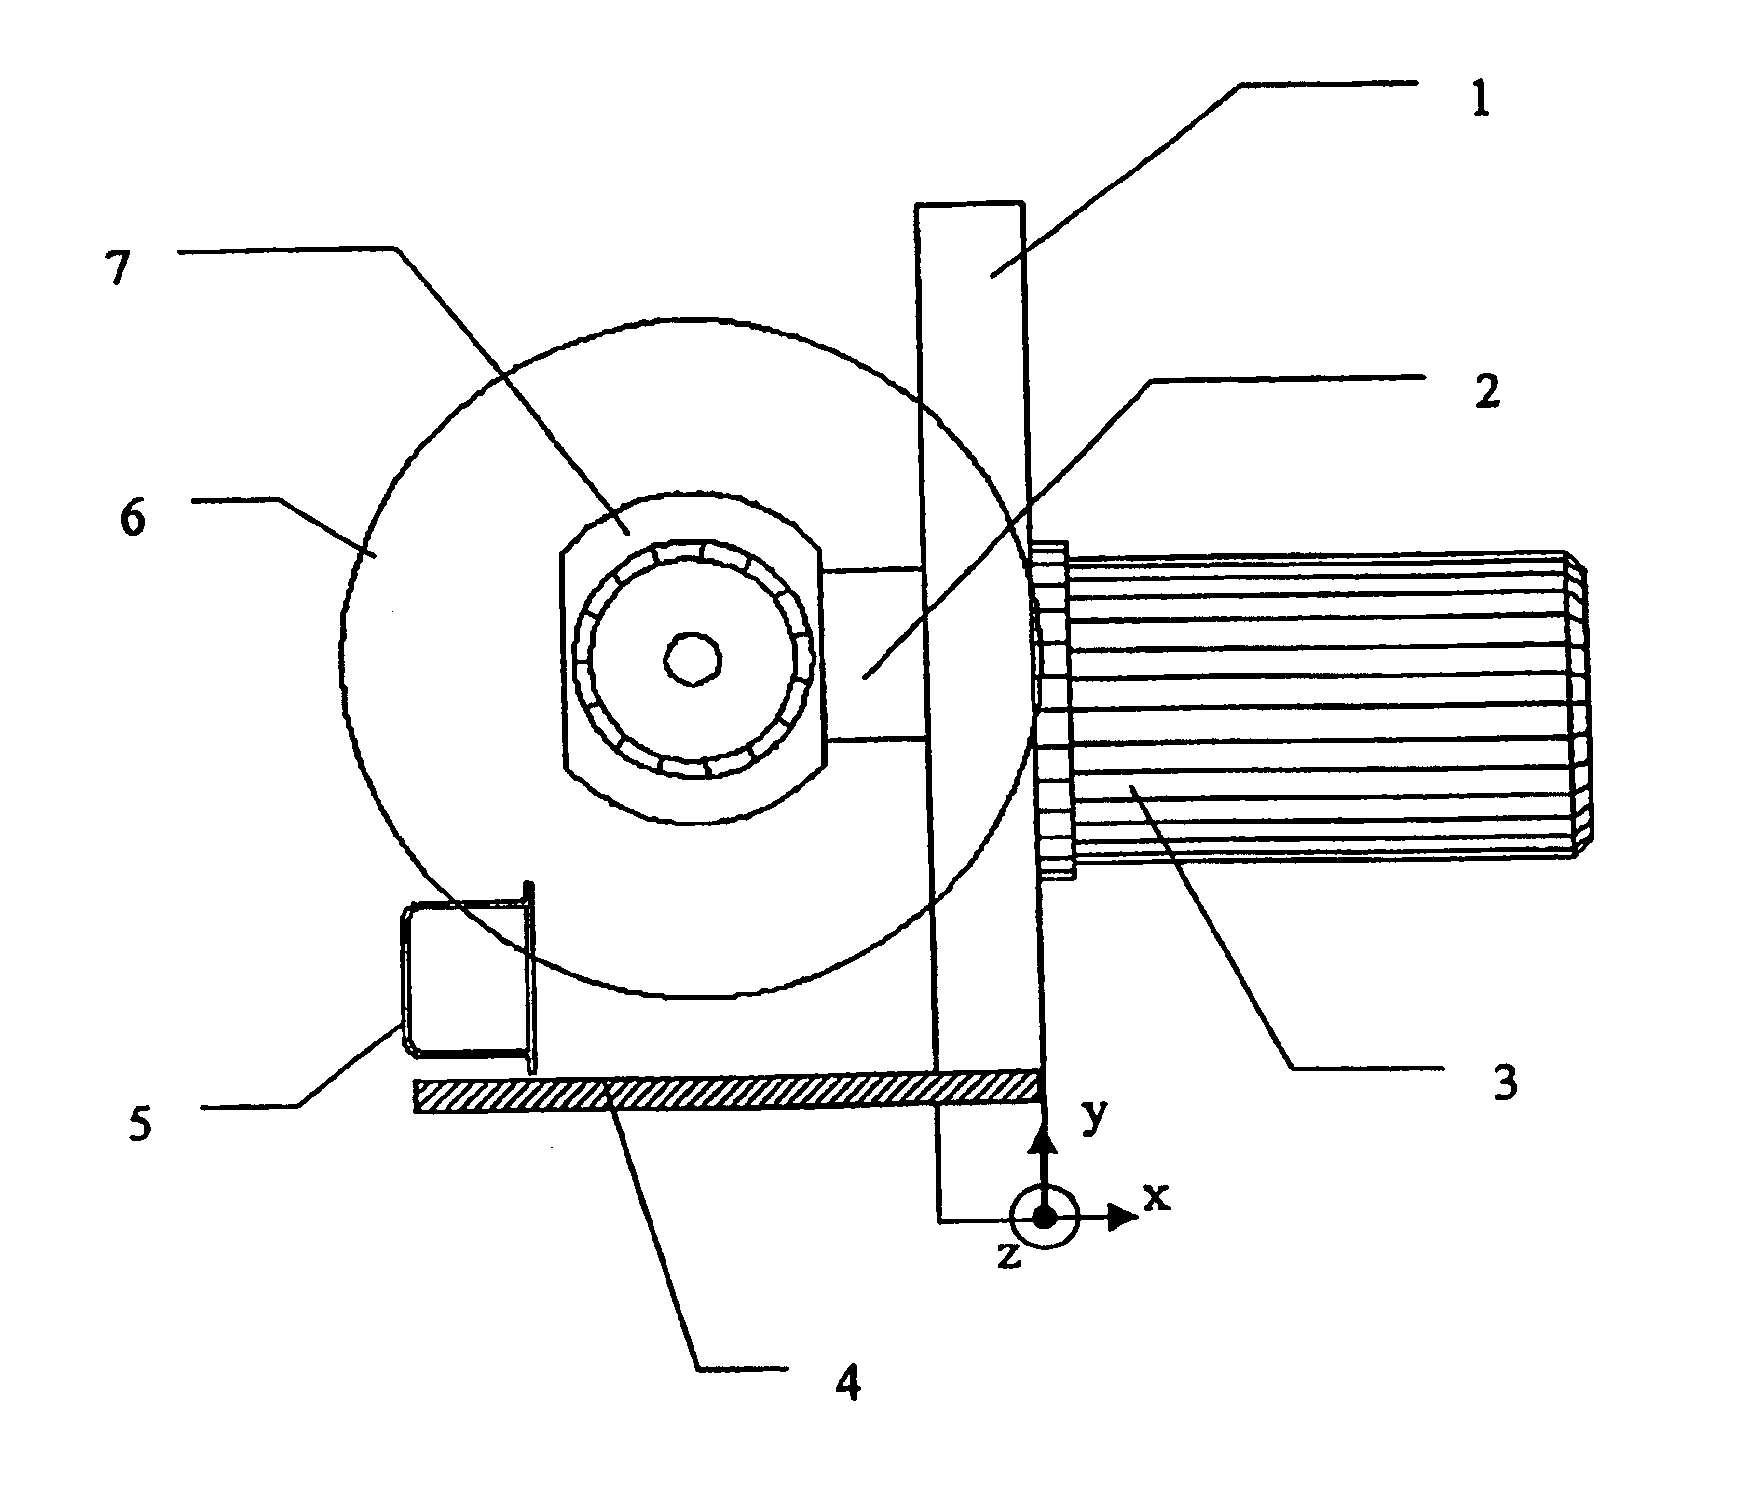 Method for cutting extruded profile sections into lengths